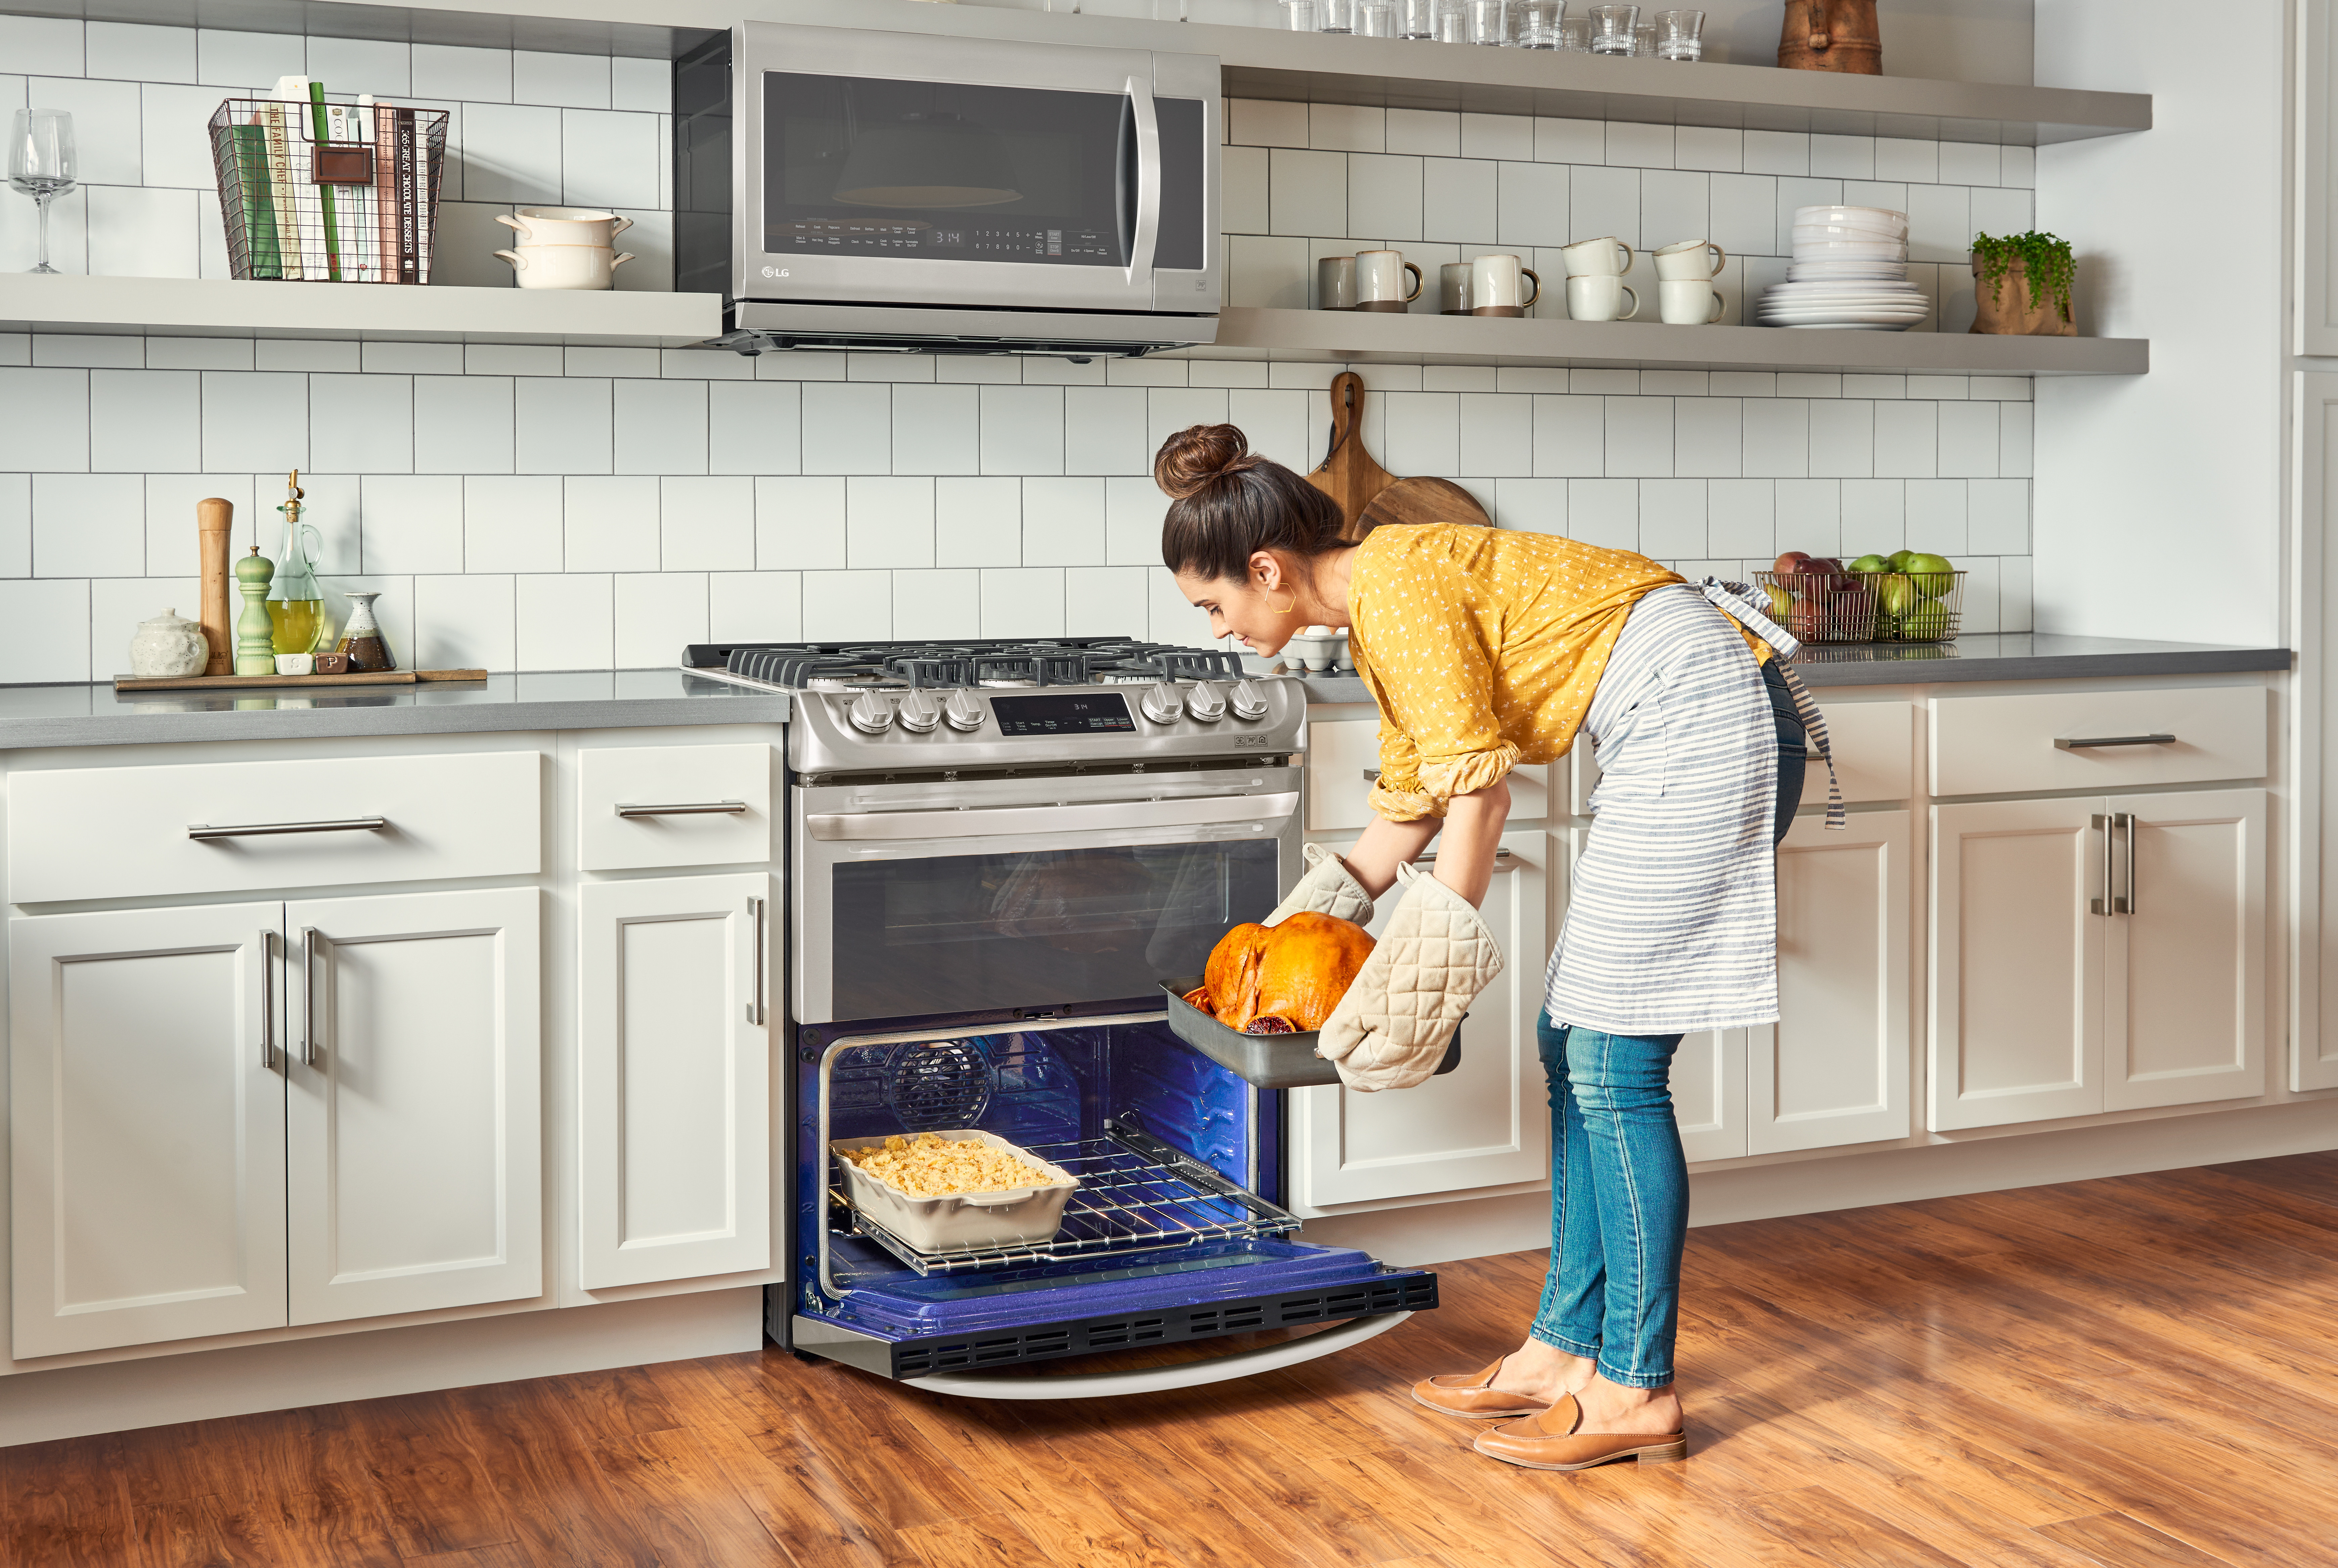 young woman retrieves roasted poultry from her LG double oven range